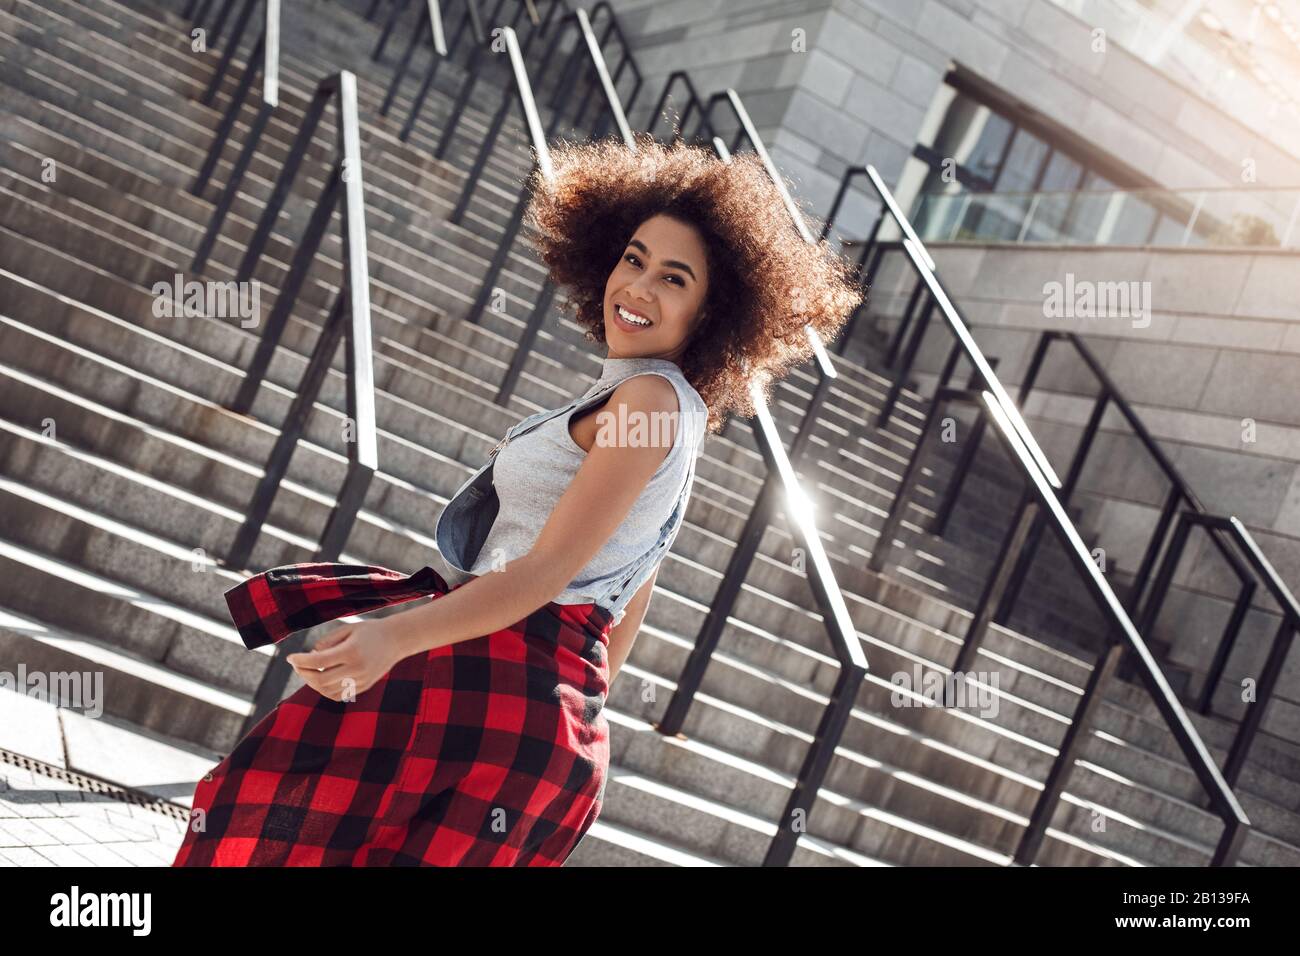 Young woman in the city street standing on stairs smiling cheerful Stock Photo